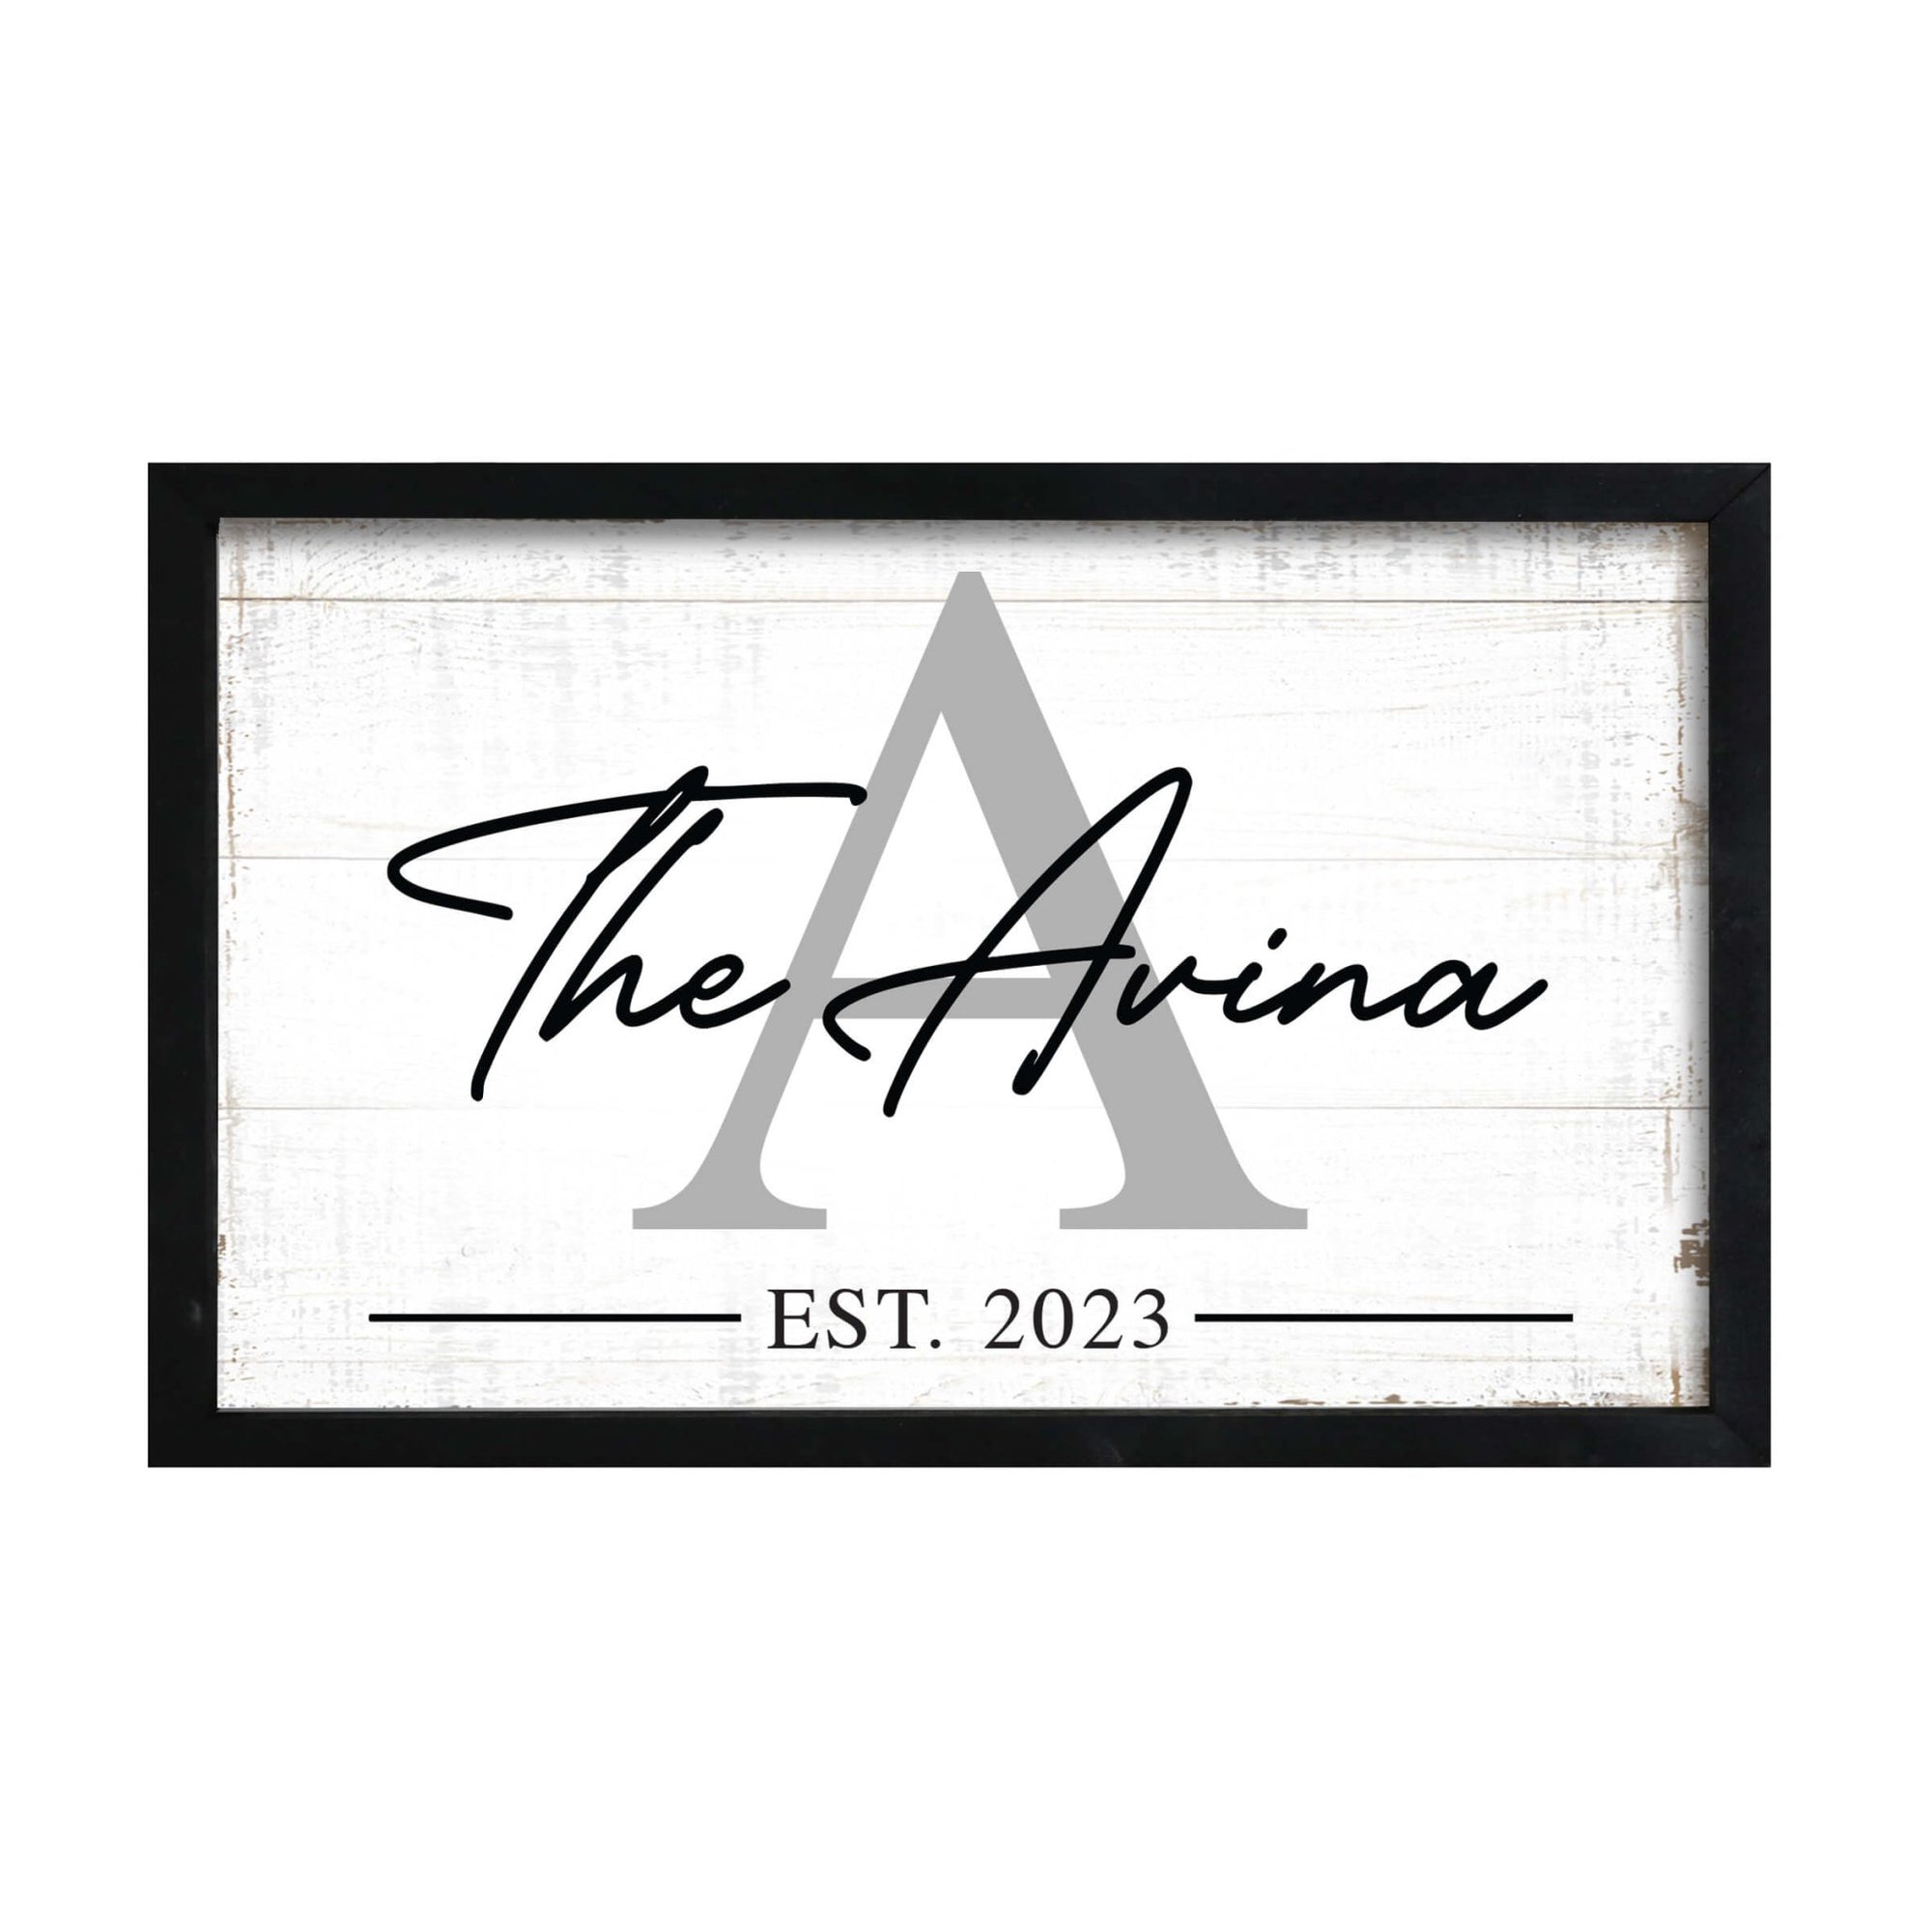 Personalized Family Wall Hanging Framed Shadow Box For Home Decor - The Avina - LifeSong Milestones